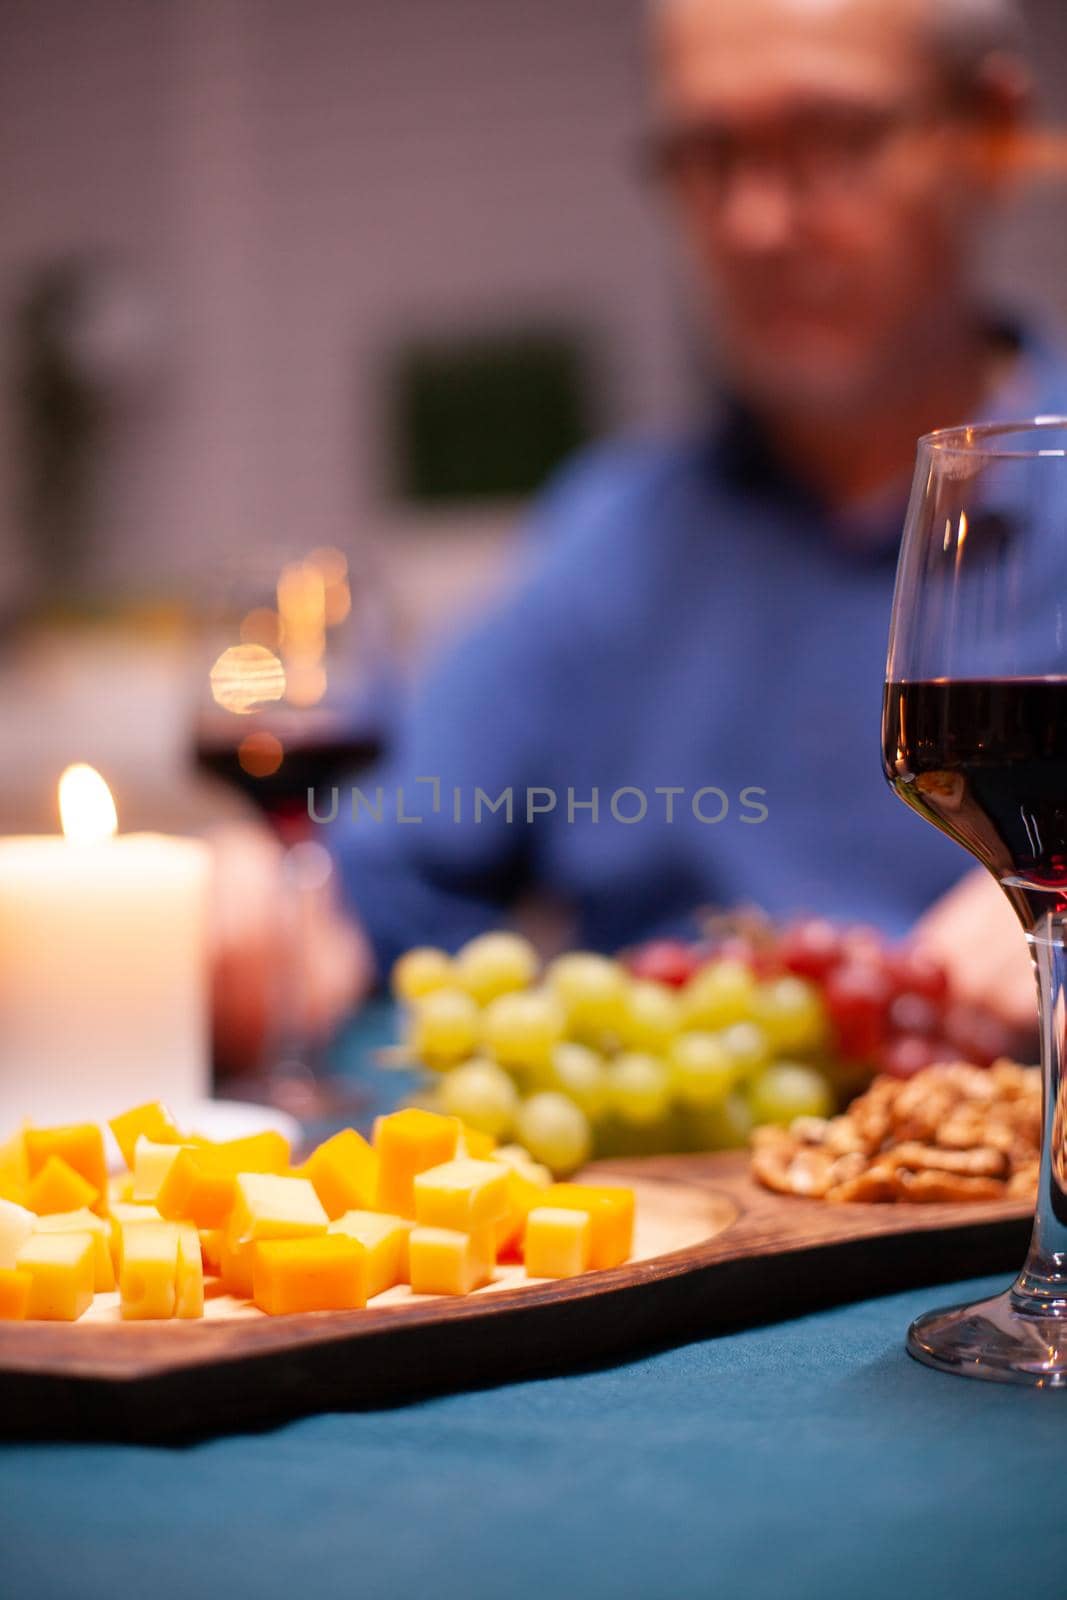 Grapes on wooden plate on kitchen table during festive dinner. Senior couple sitting at the table in kitchen, talking, enjoying the meal, celebrating their anniversary in the dining room.